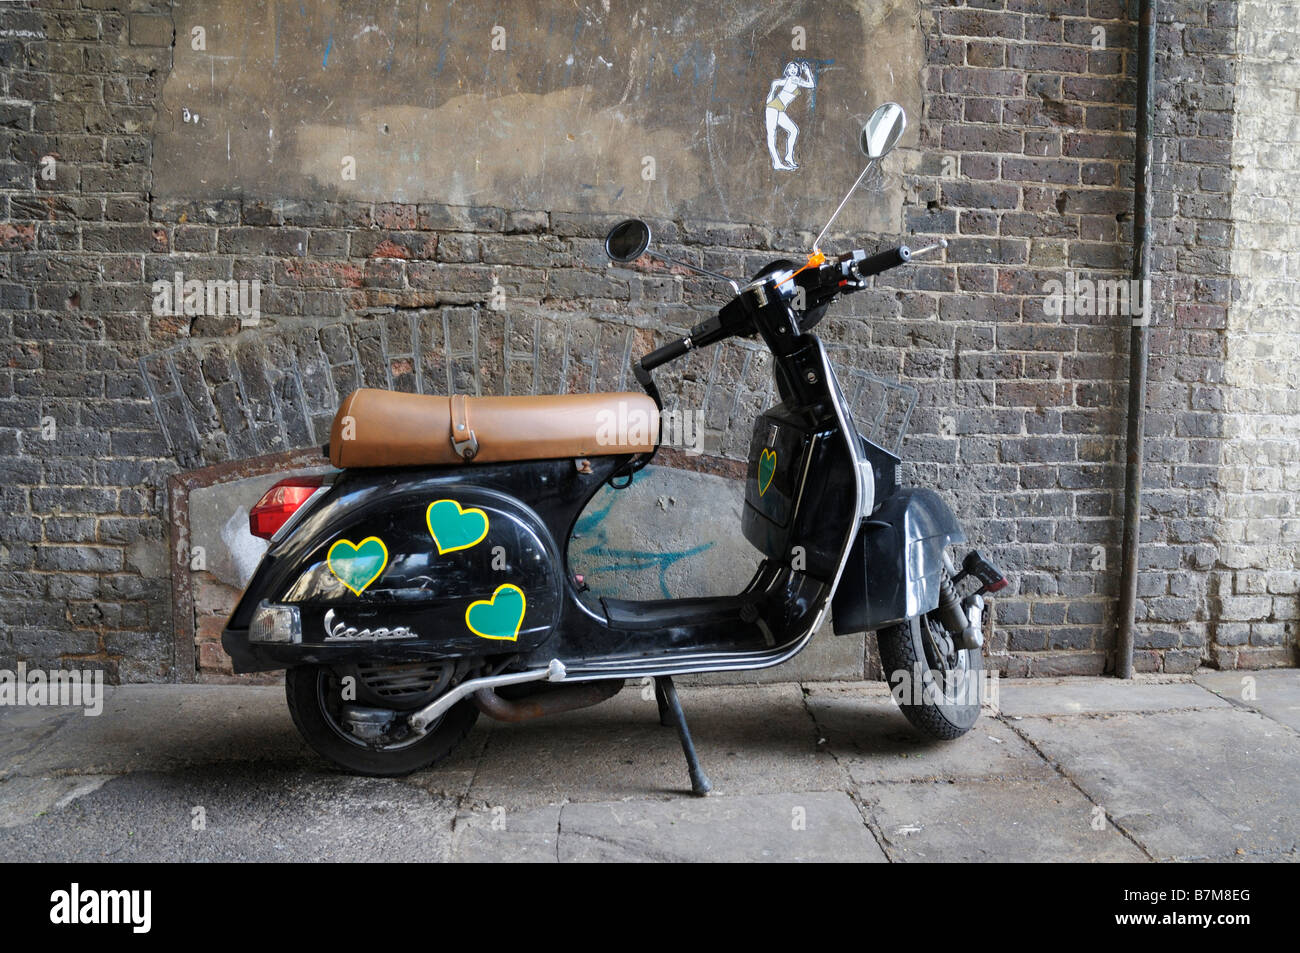 Vespa scooter with heart decals, London Stock Photo